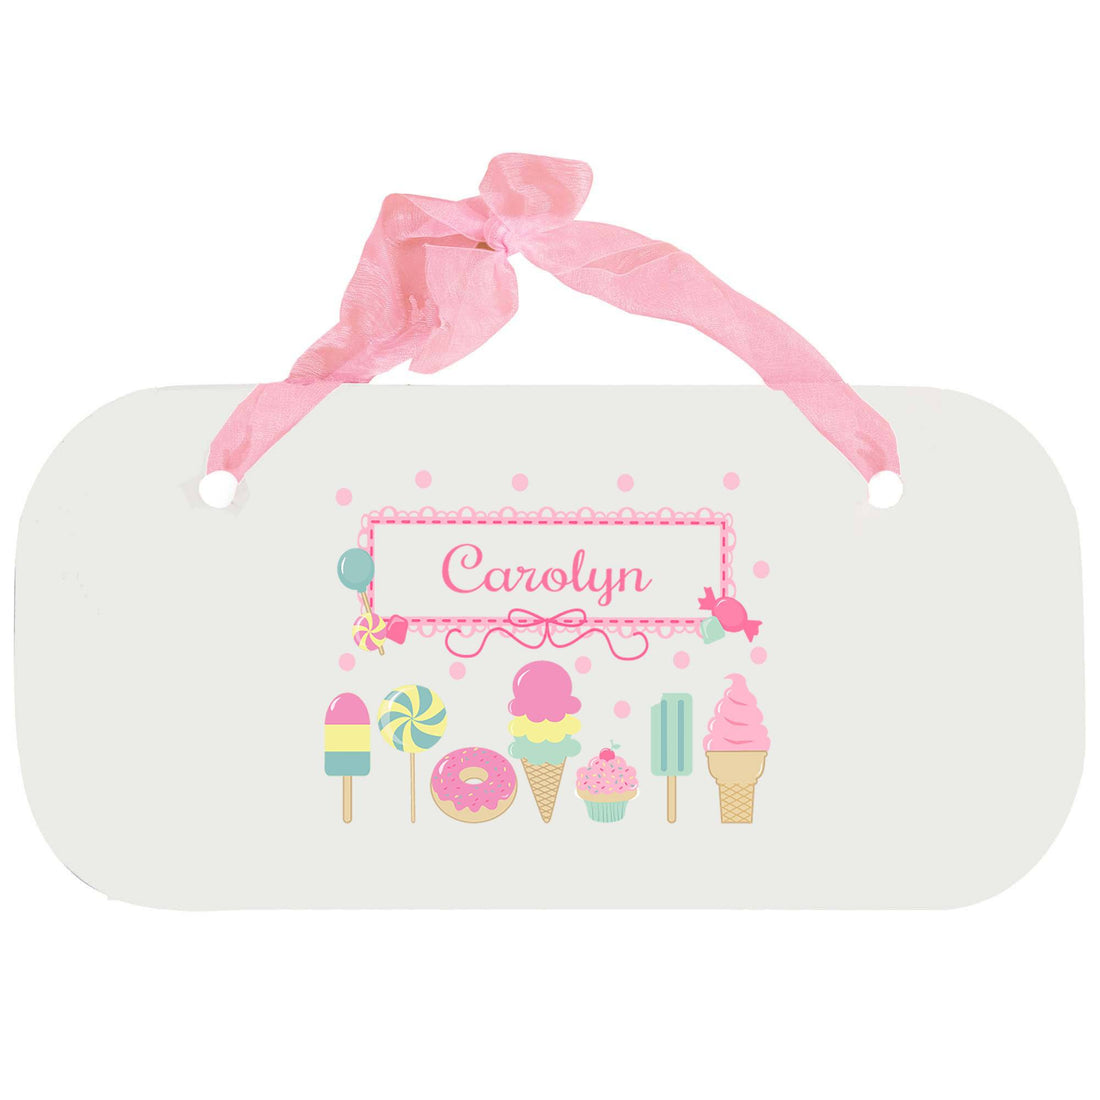 Personalized Girls Wall Plaque with Sweet Treats design